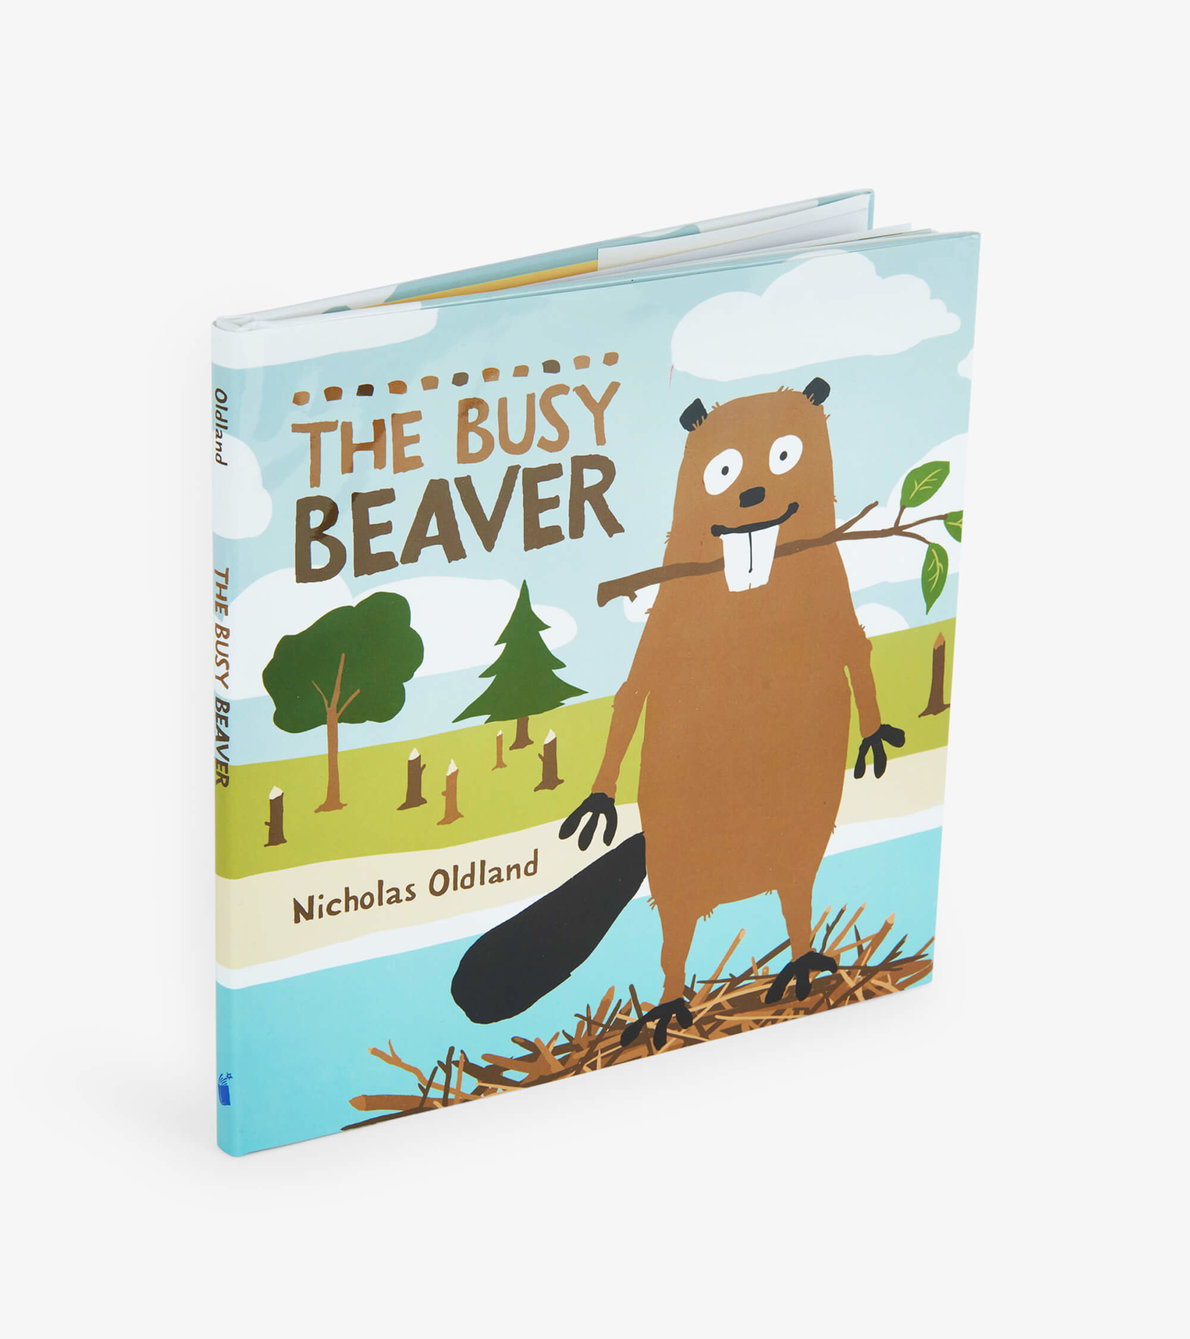 View larger image of "The Busy Beaver" Children's Book